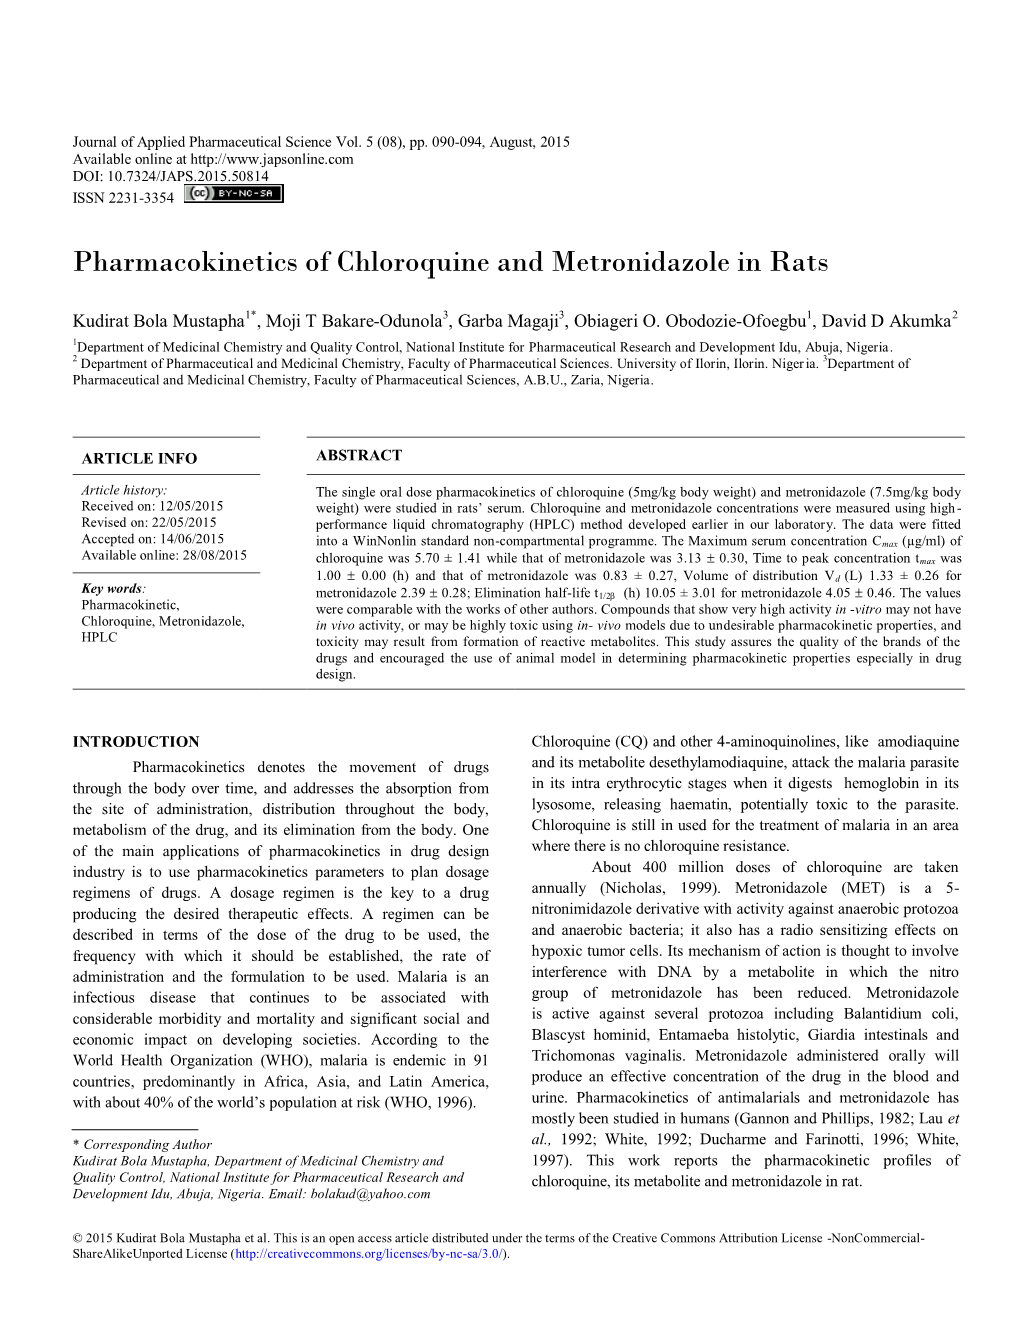 Pharmacokinetics of Chloroquine and Metronidazole in Rats